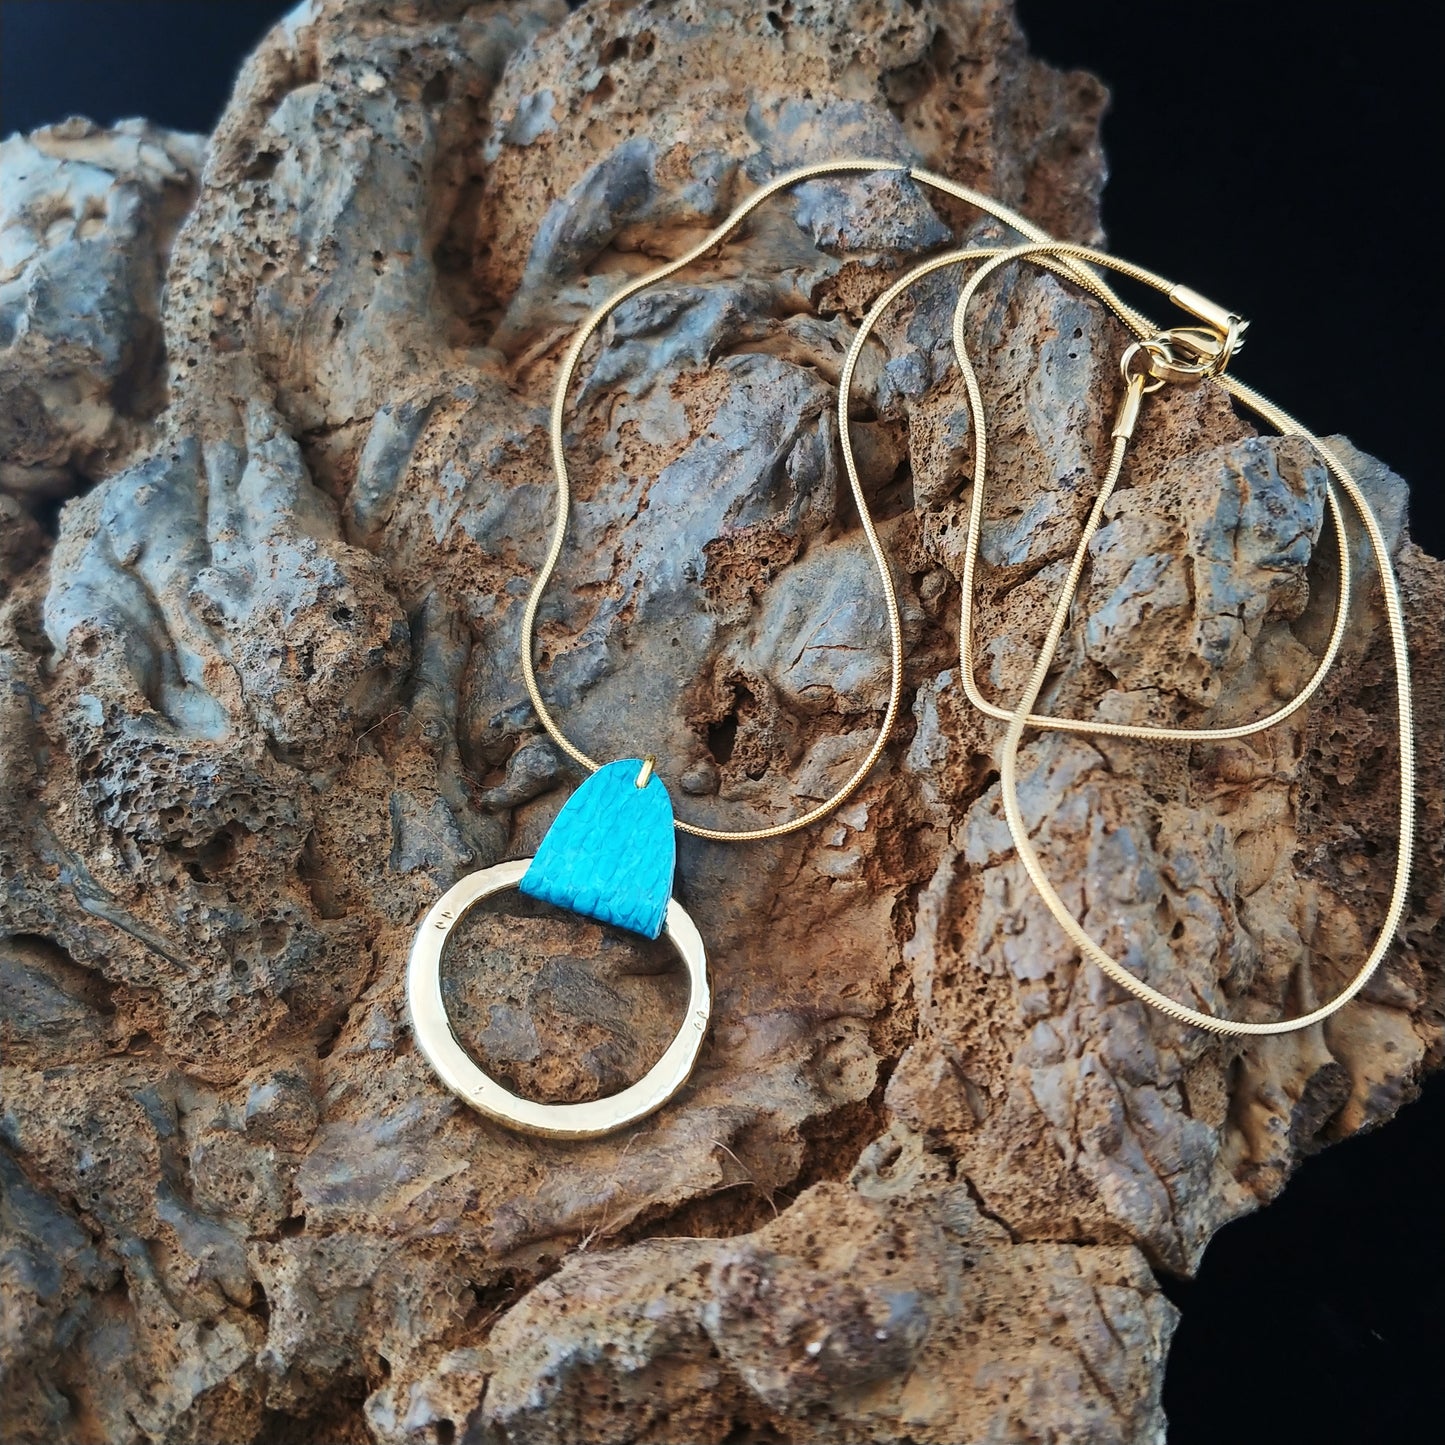 Necklace sitting on a black lava display. Necklace chain and circle center piece are golden color and the chain and circle are connected with icelandic fish leather that's brigh blue.